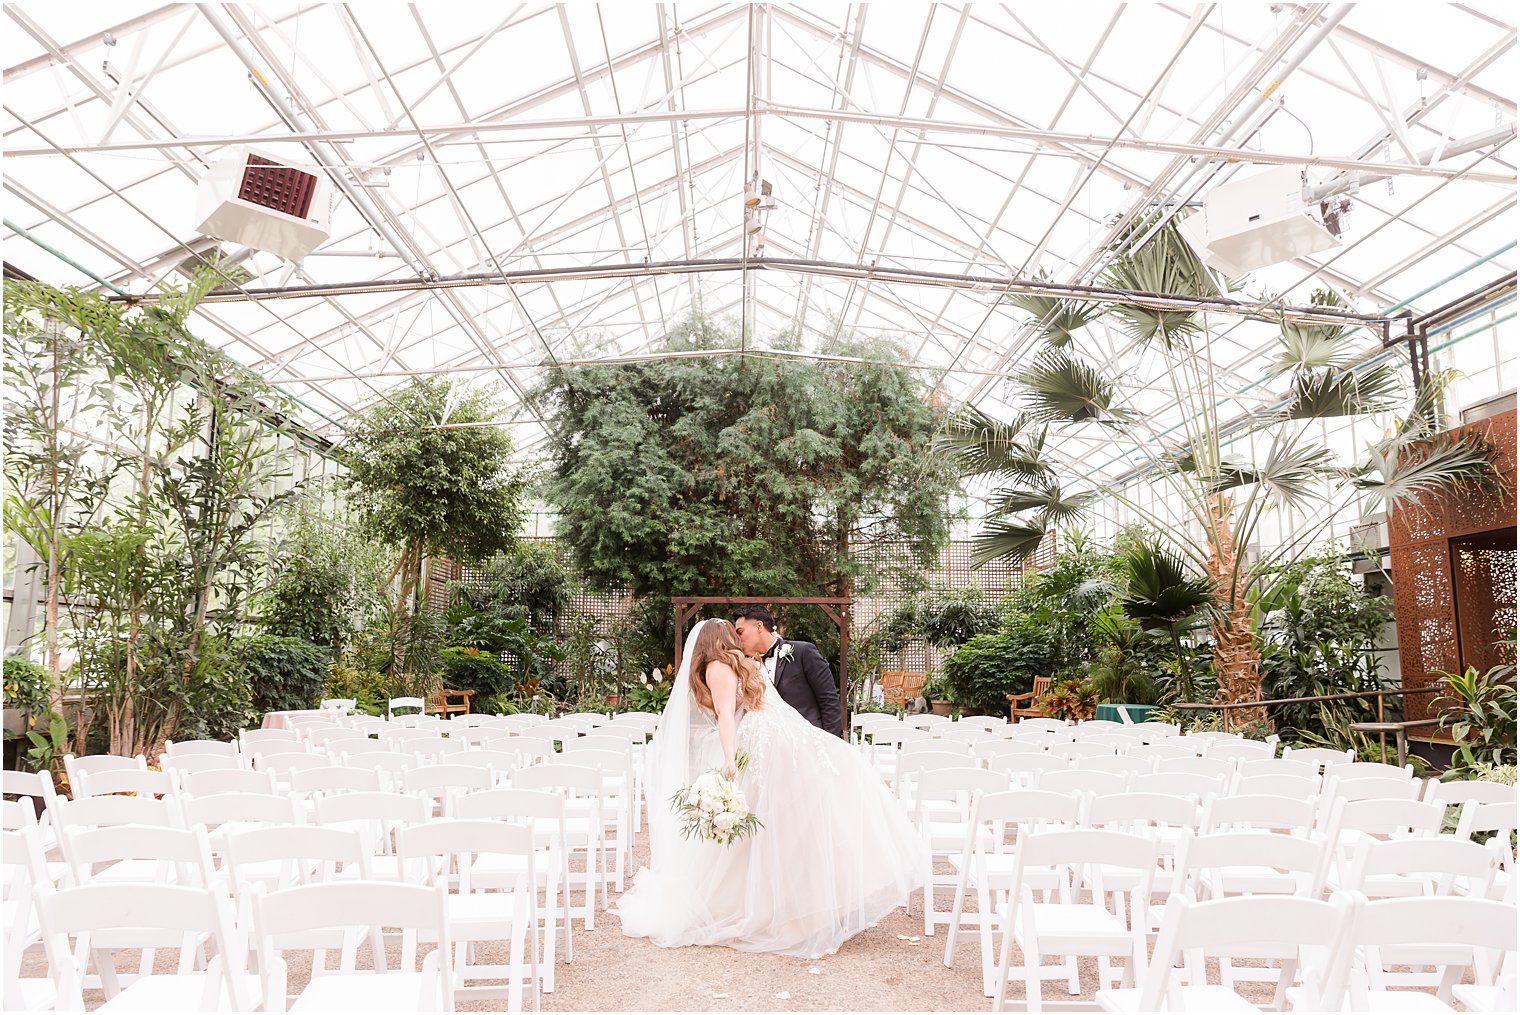 newlyweds kiss in greenhouse at Fairmont Park Horticulture Center 